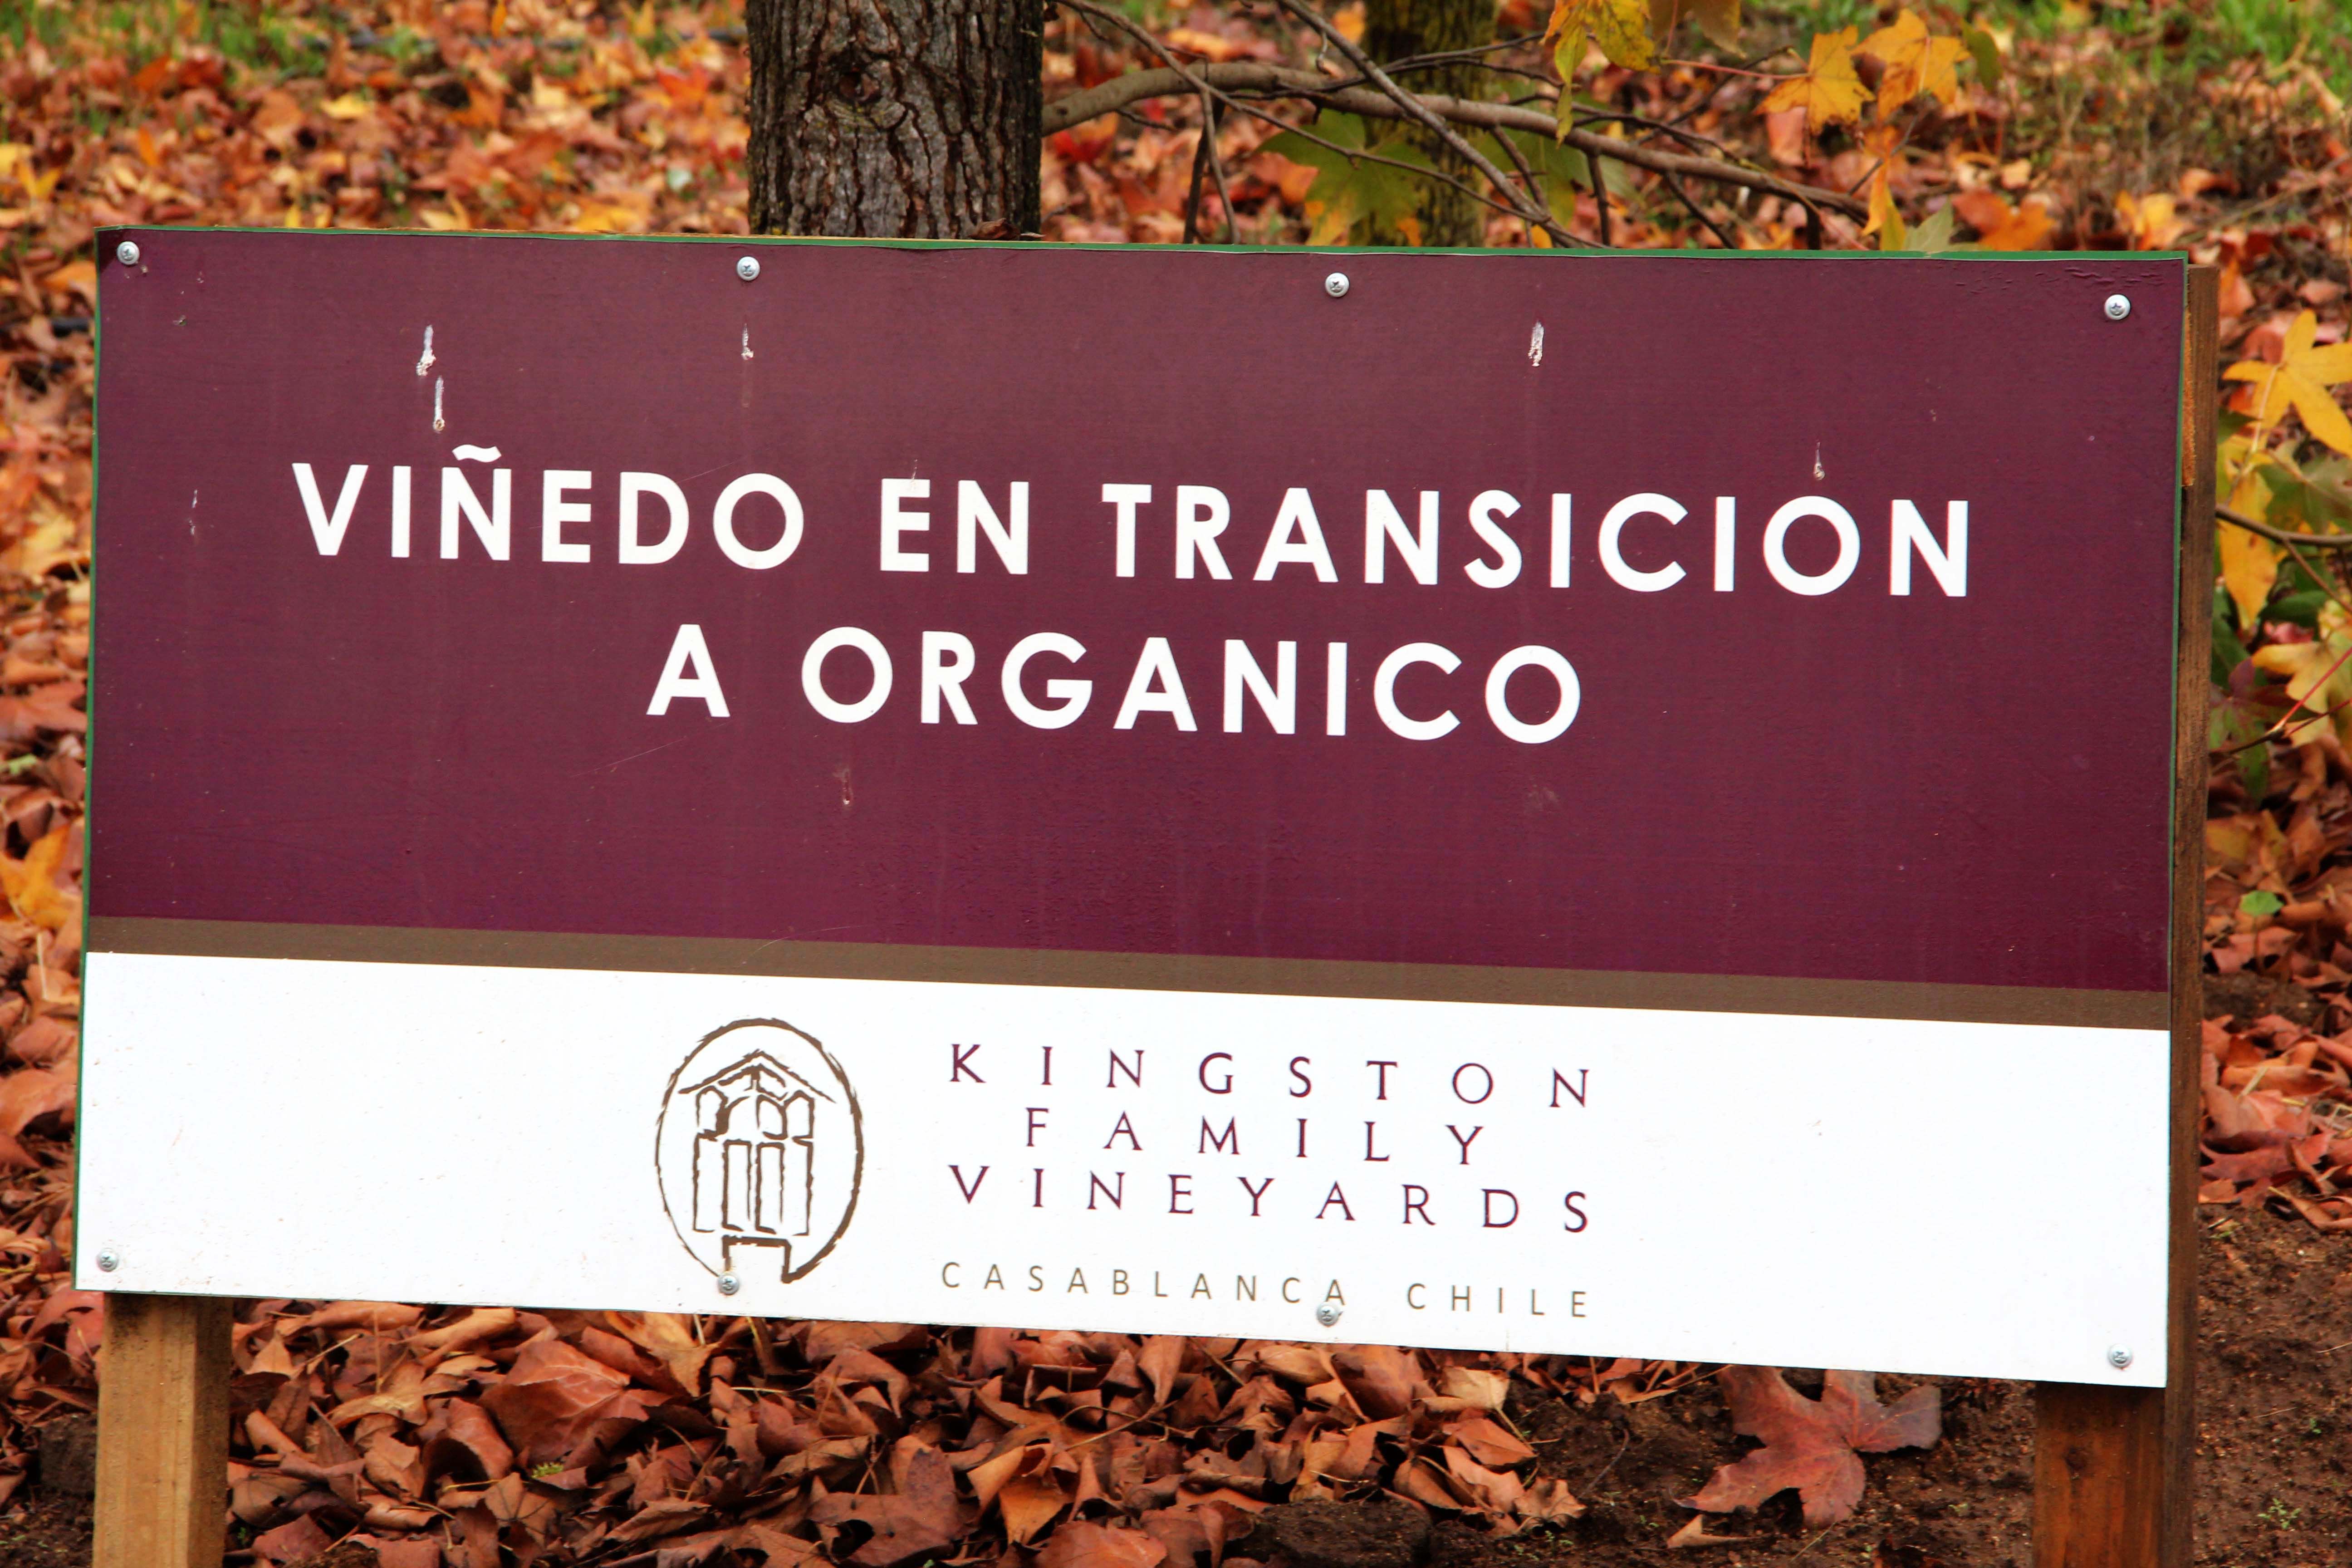 Sign at Kingston Family Vineyards promoting the transition to a fully organic vineyard. Image by Taylor Lord. Chile, 2017.